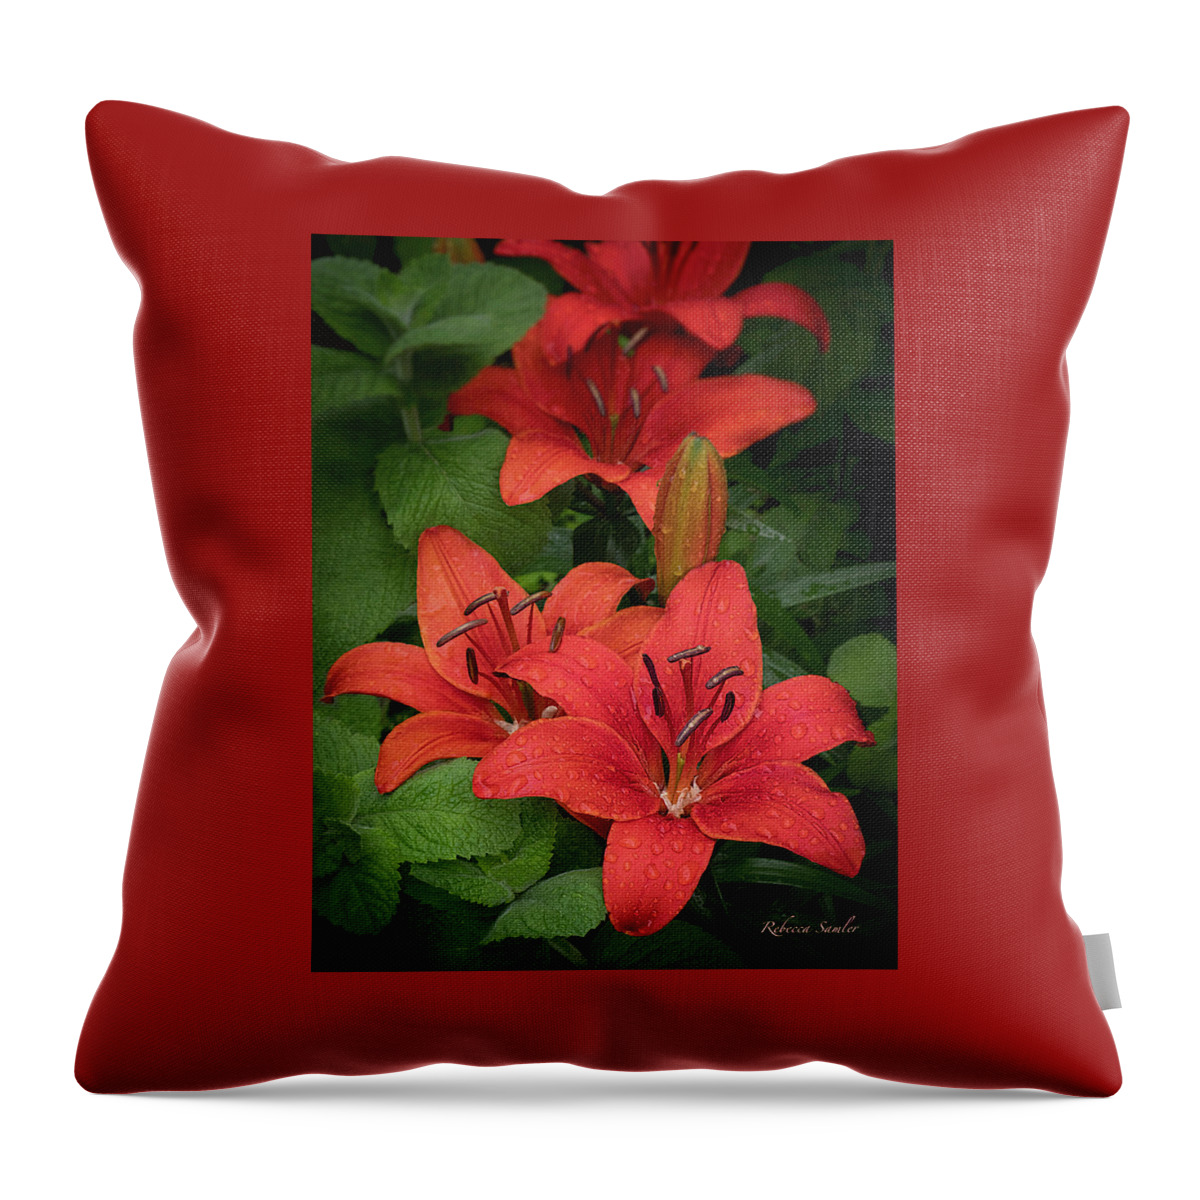 Lilies Throw Pillow featuring the photograph Lilies by Rebecca Samler